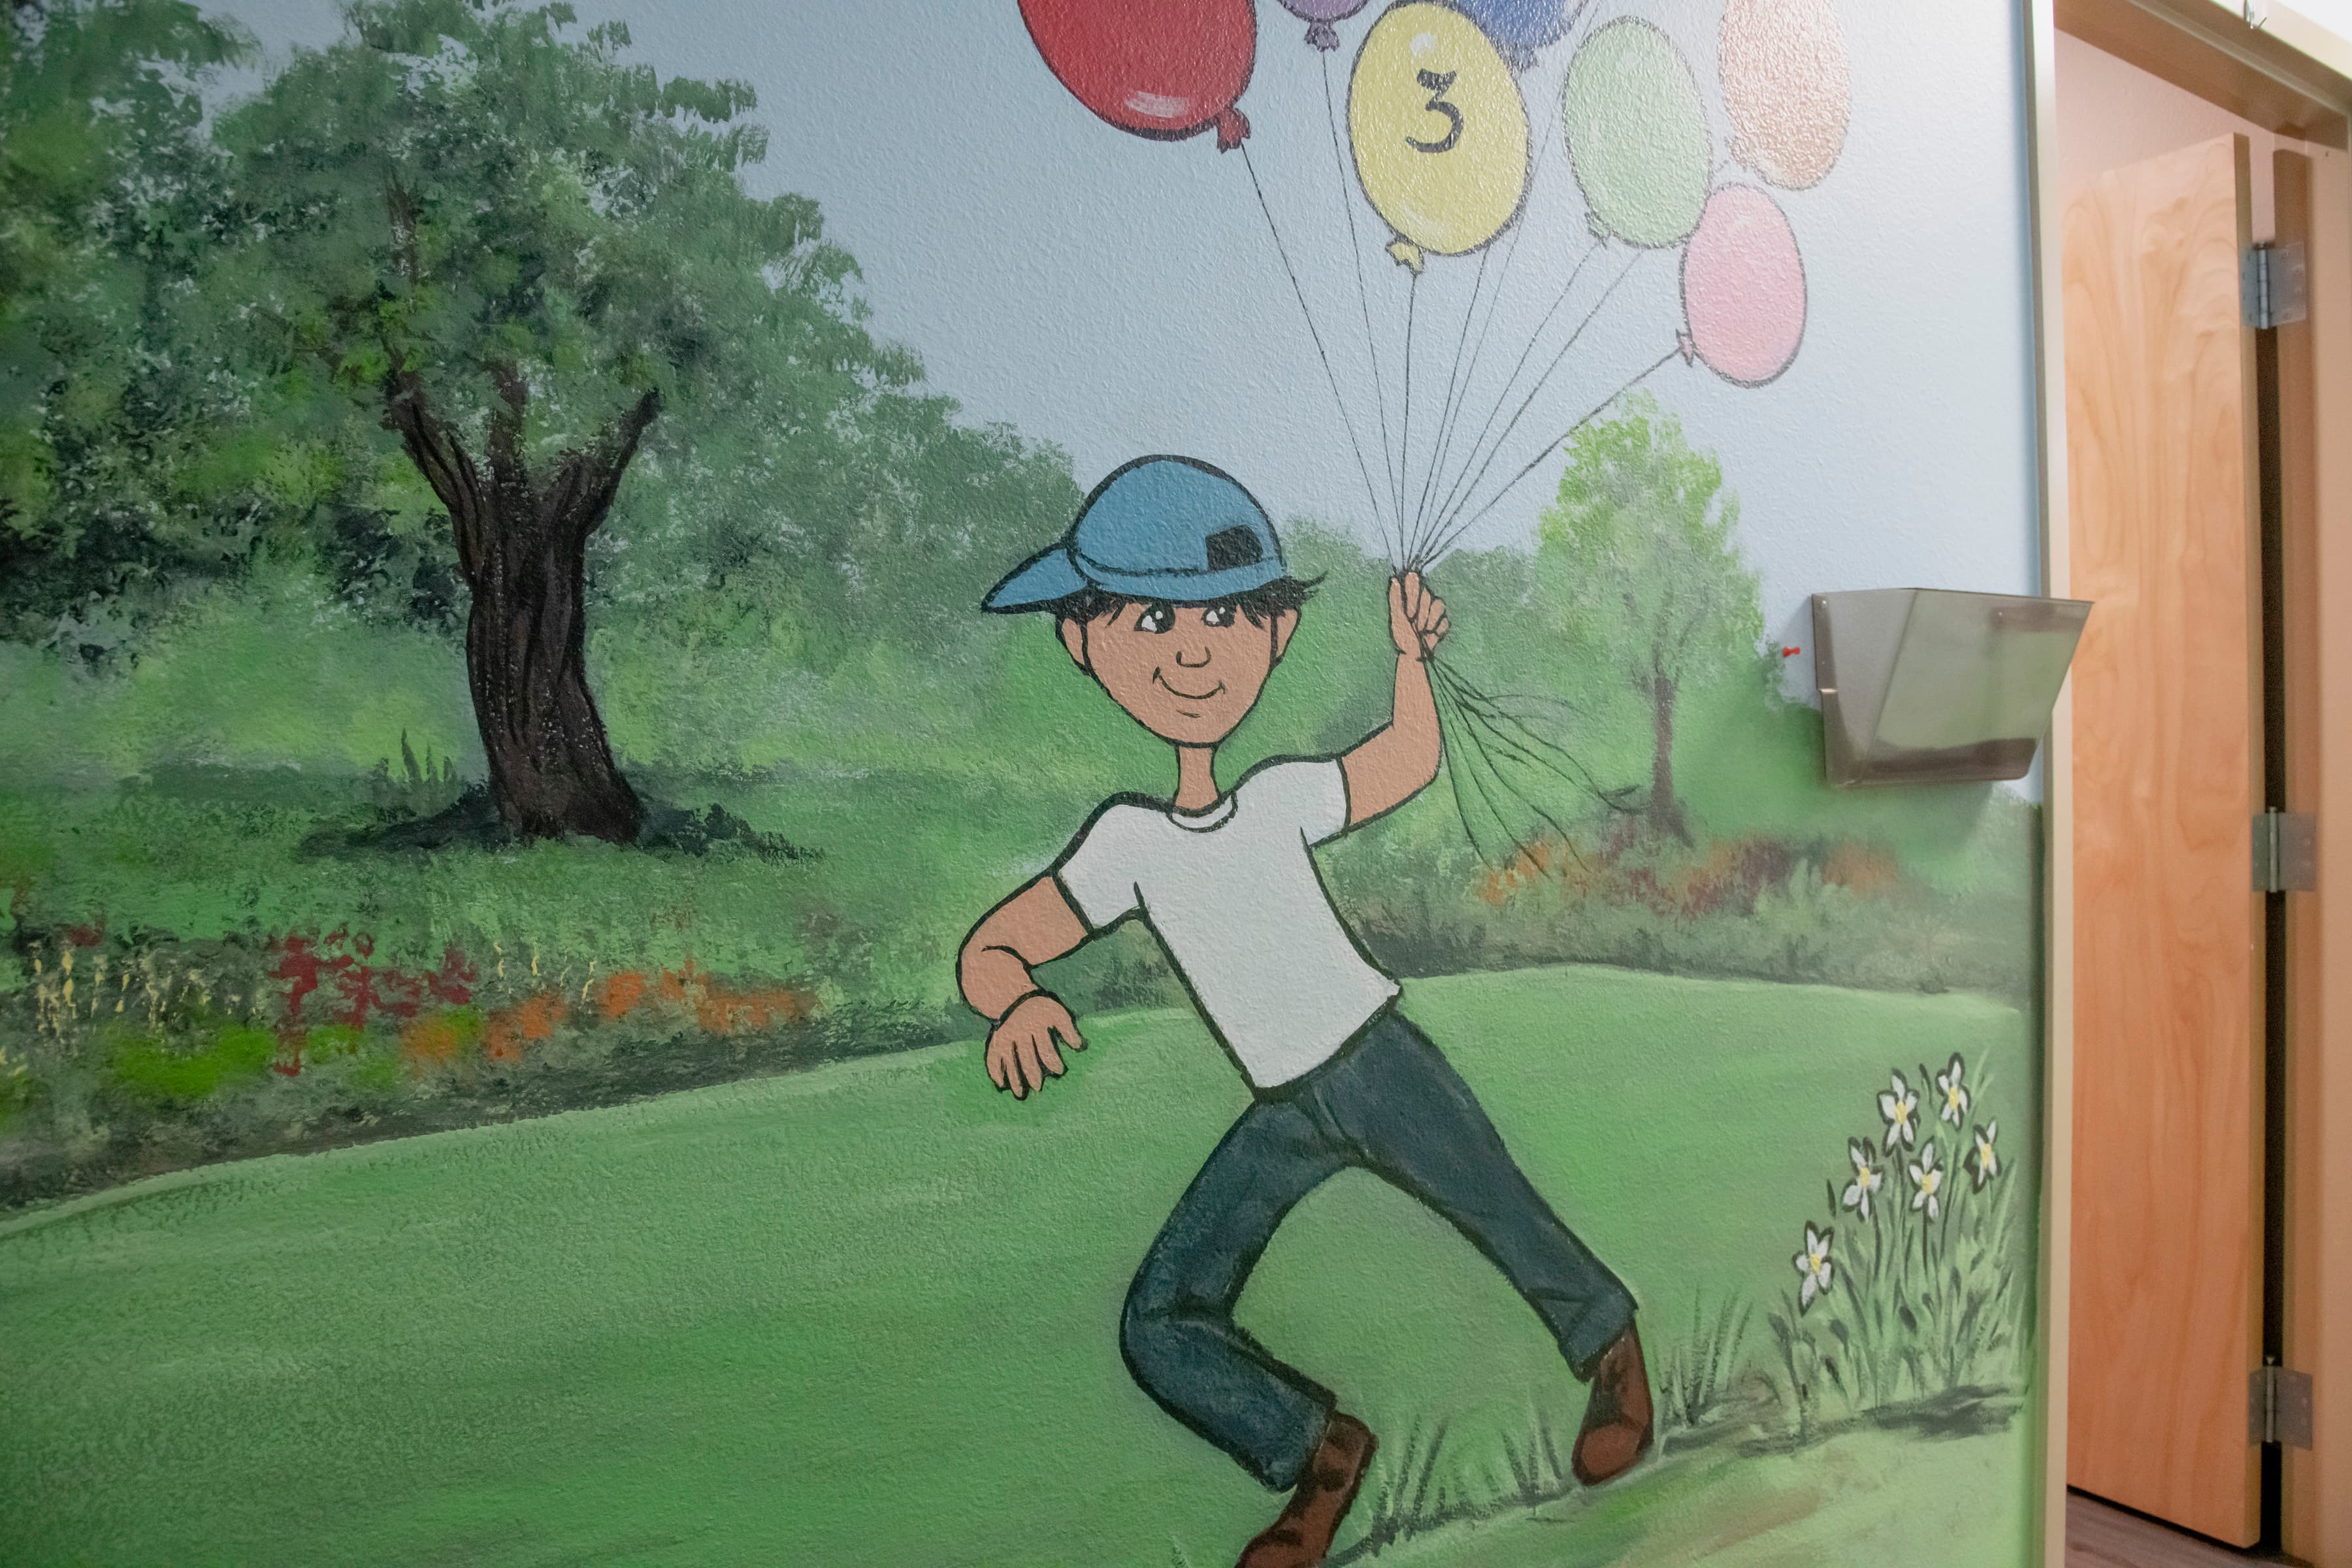 graphic image of a boy holding balloons